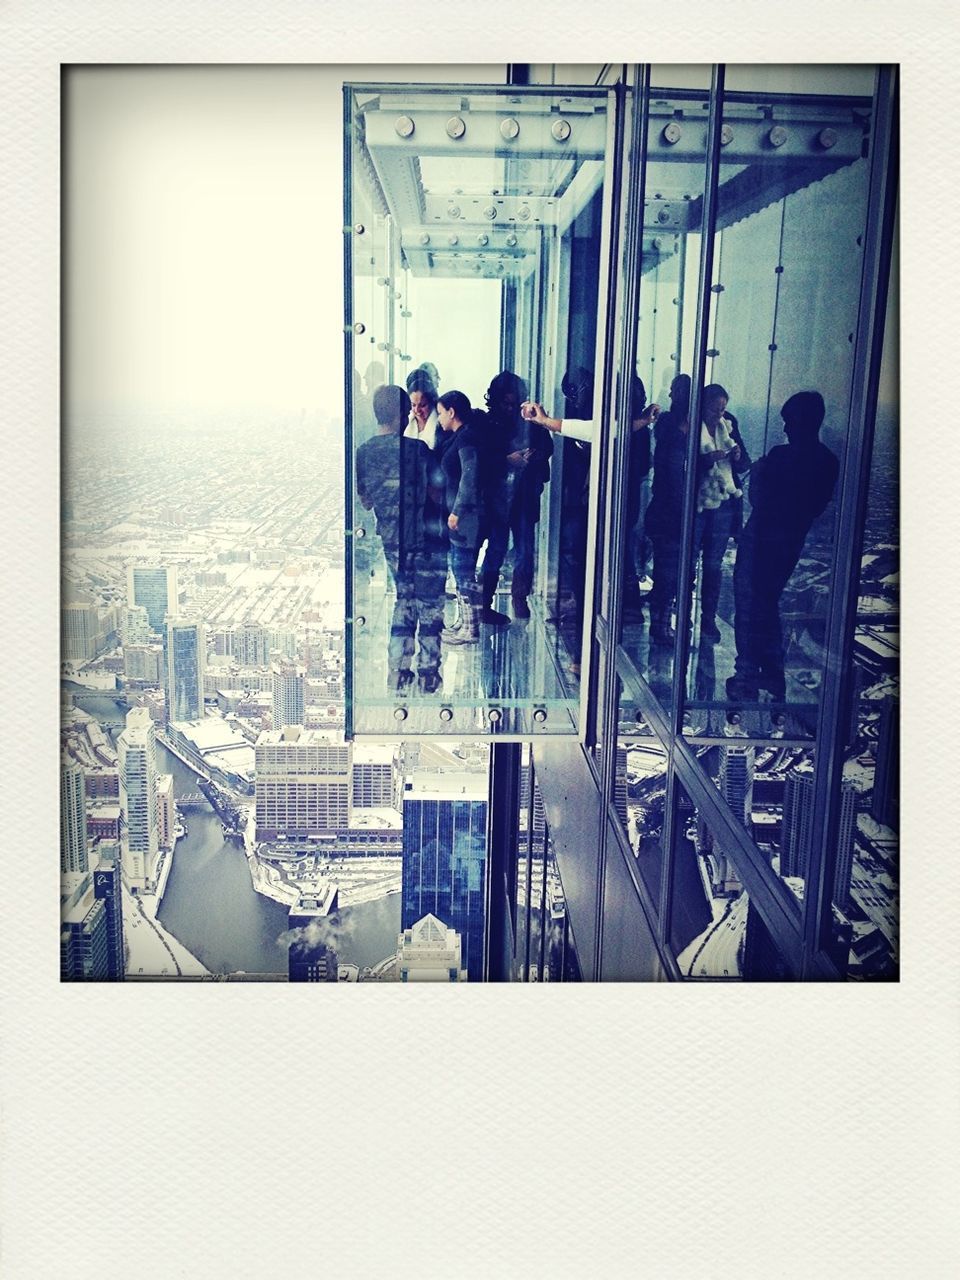 People looking at cityscape on glass ledge of building in city